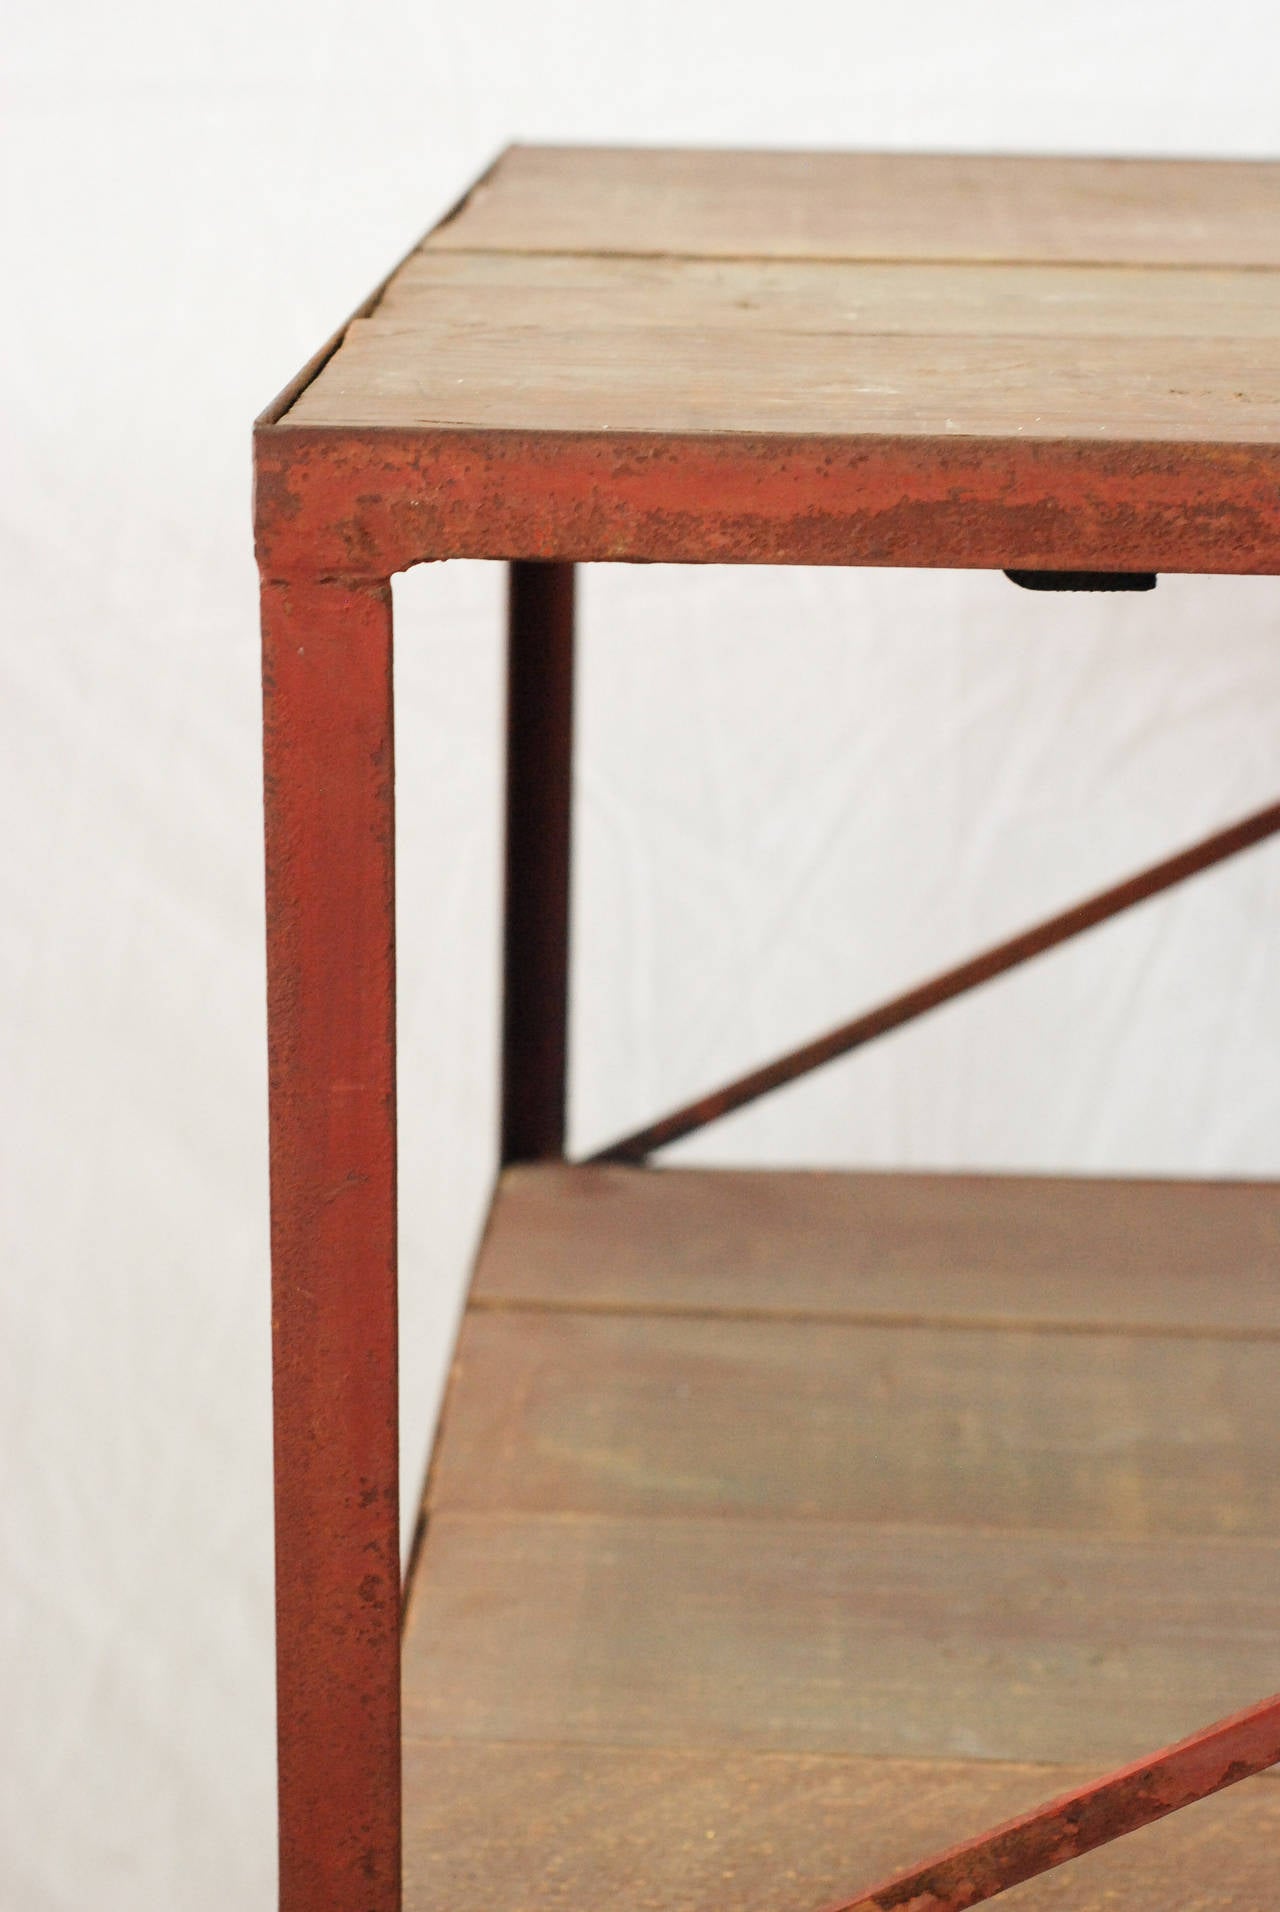 19th century two-tier work table of red iron and pine planks on wheels.